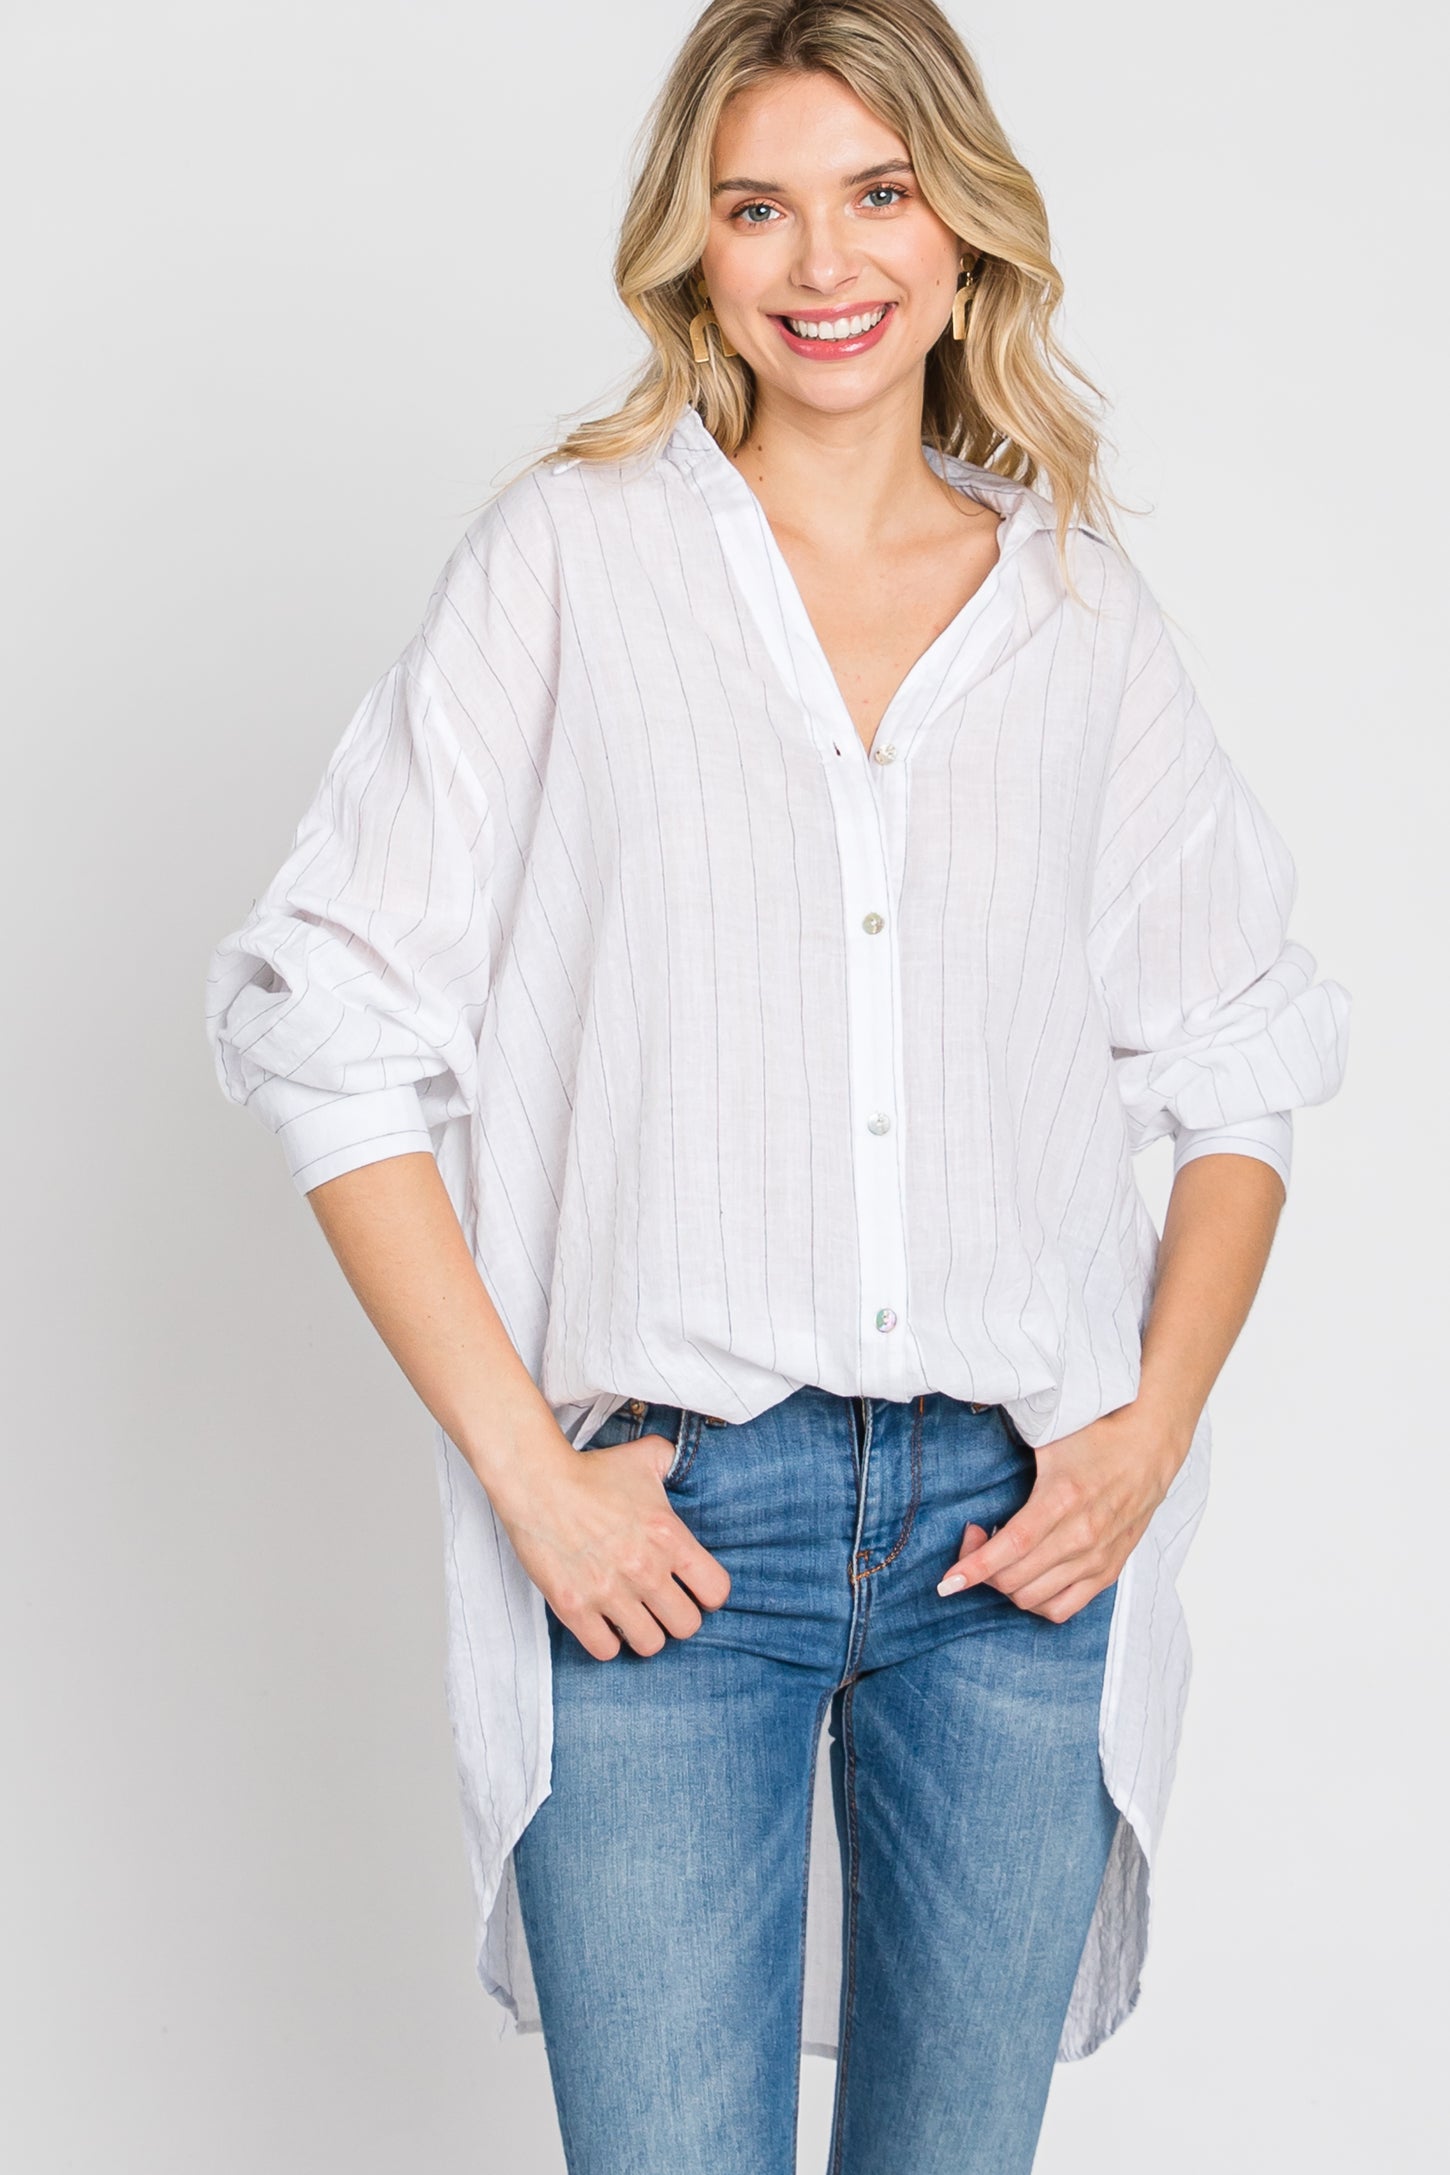 White Striped Button Up Top